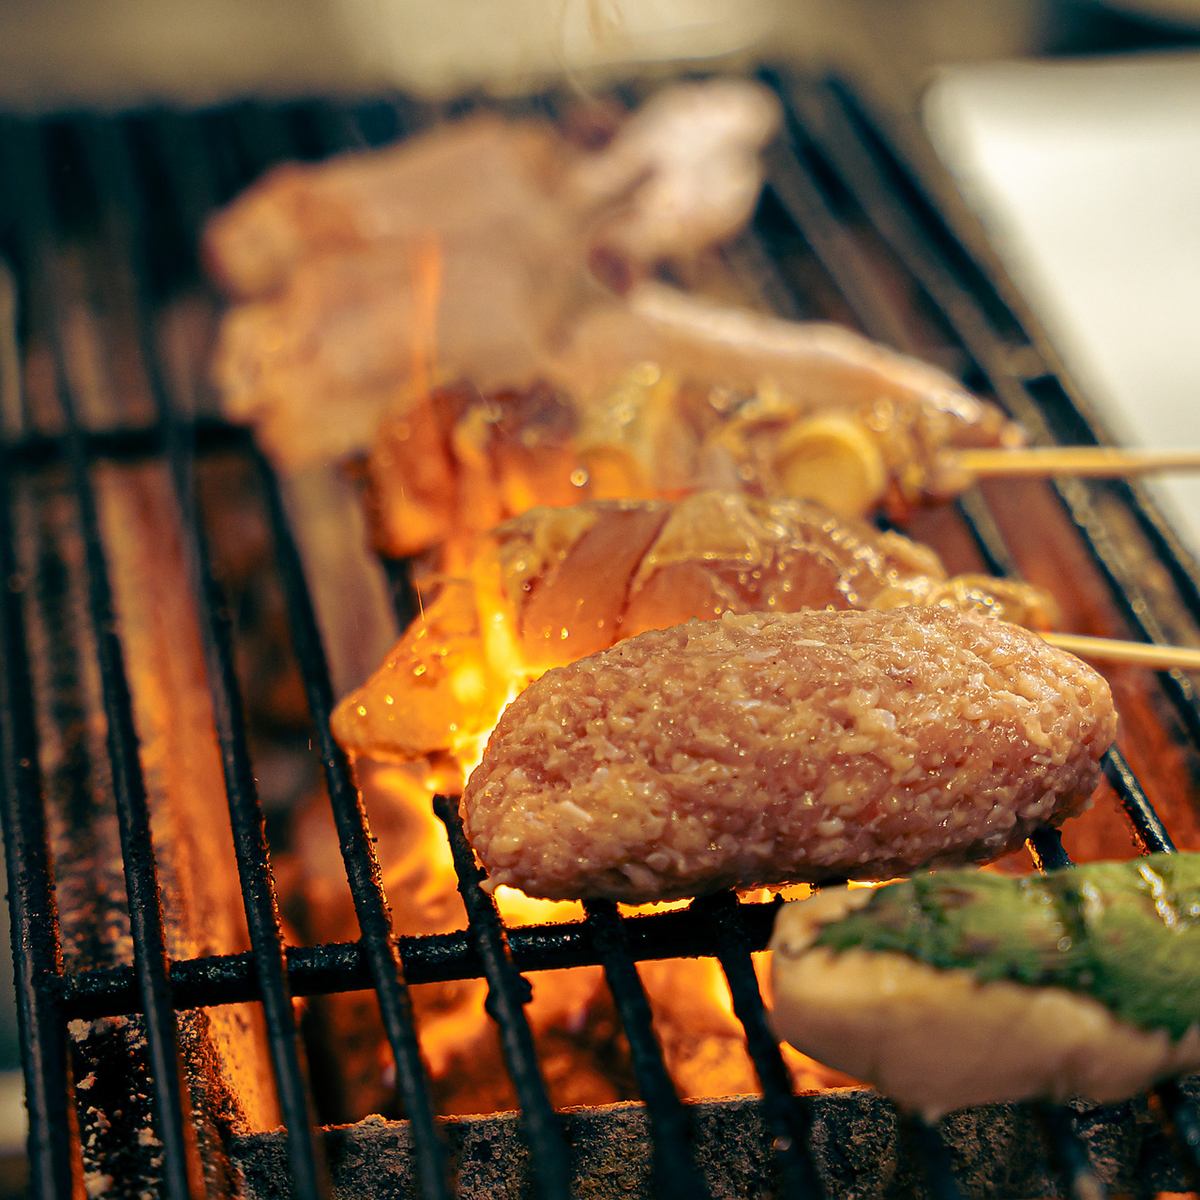 Enjoy authentic charcoal-grilled yakitori in a calm interior with a black and wood interior designed by the owner himself.